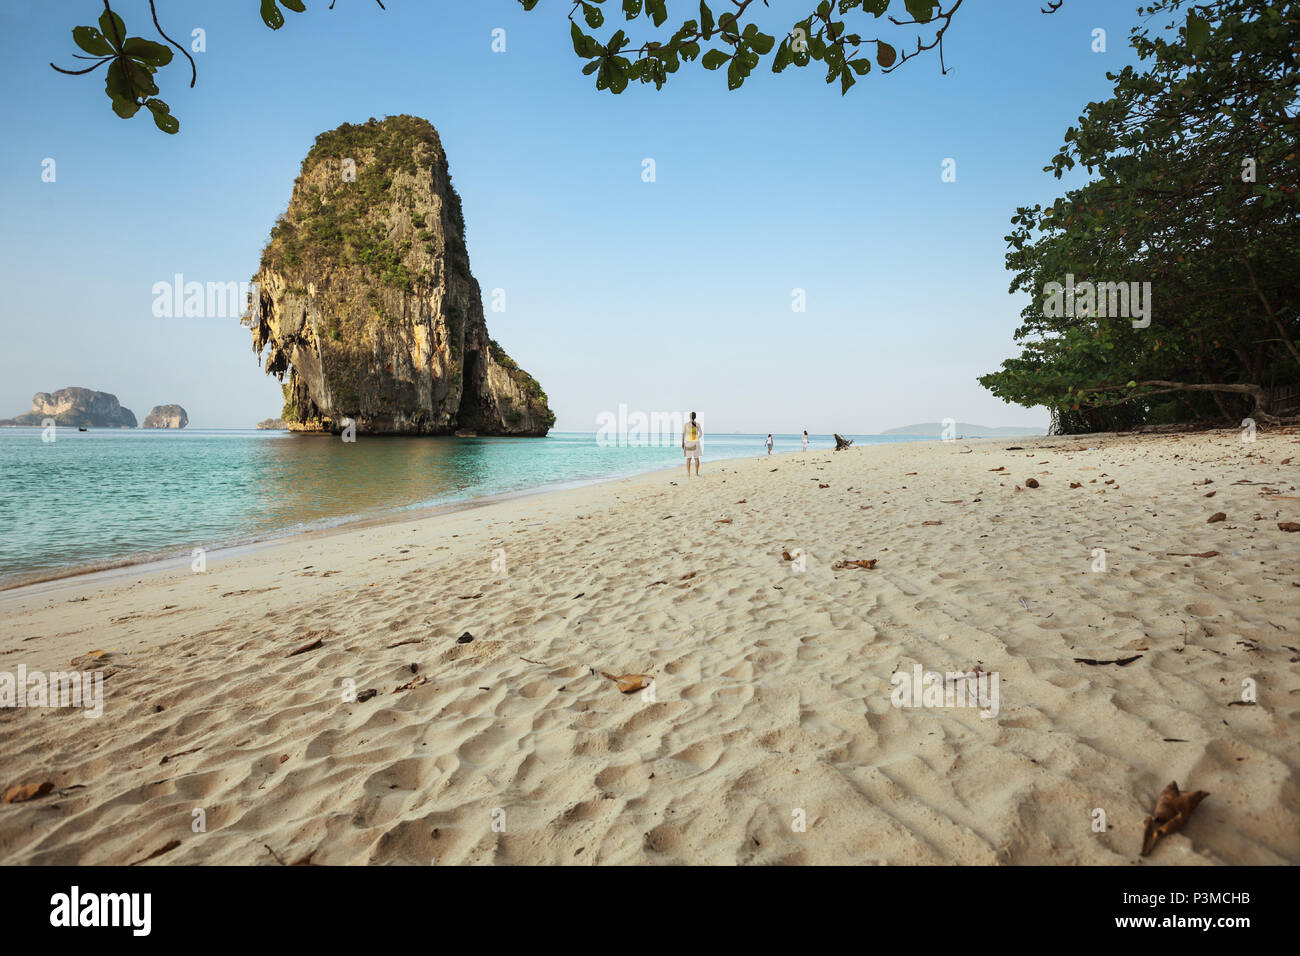 KRABI, THAILAND - CIRCA MAR 2013: Krabi province in Thailand. The beautiful beaches of Railay. Tourists went for a walk early in the morning Stock Photo